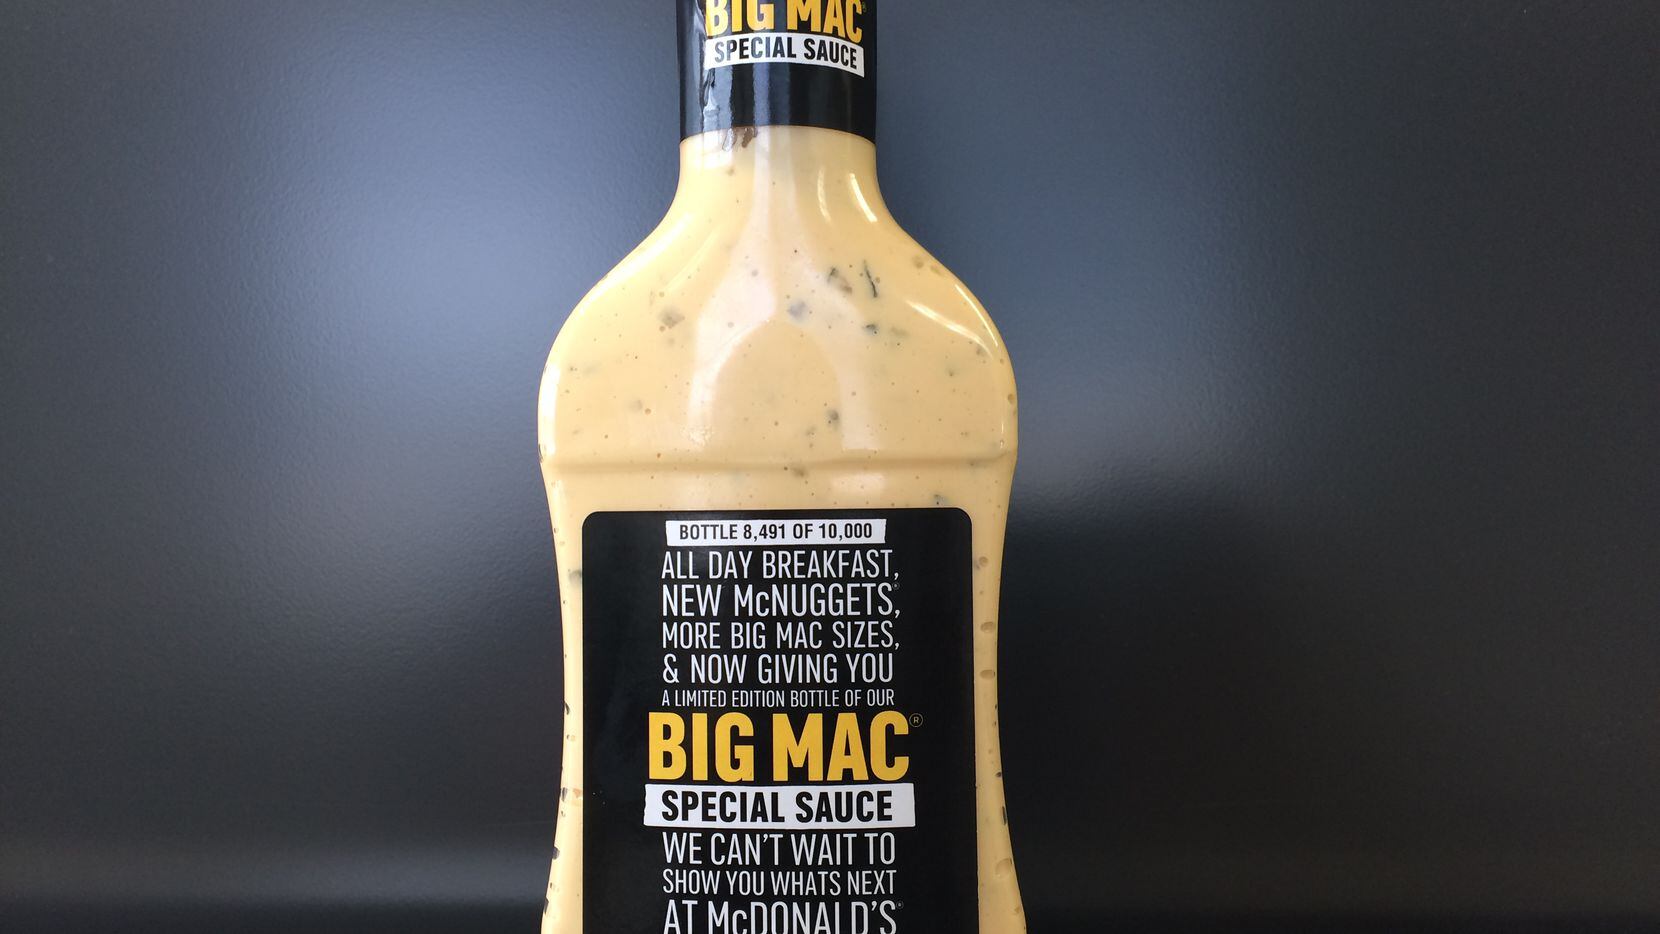 Just what you're been waiting for: Big Mac Special Sauce.